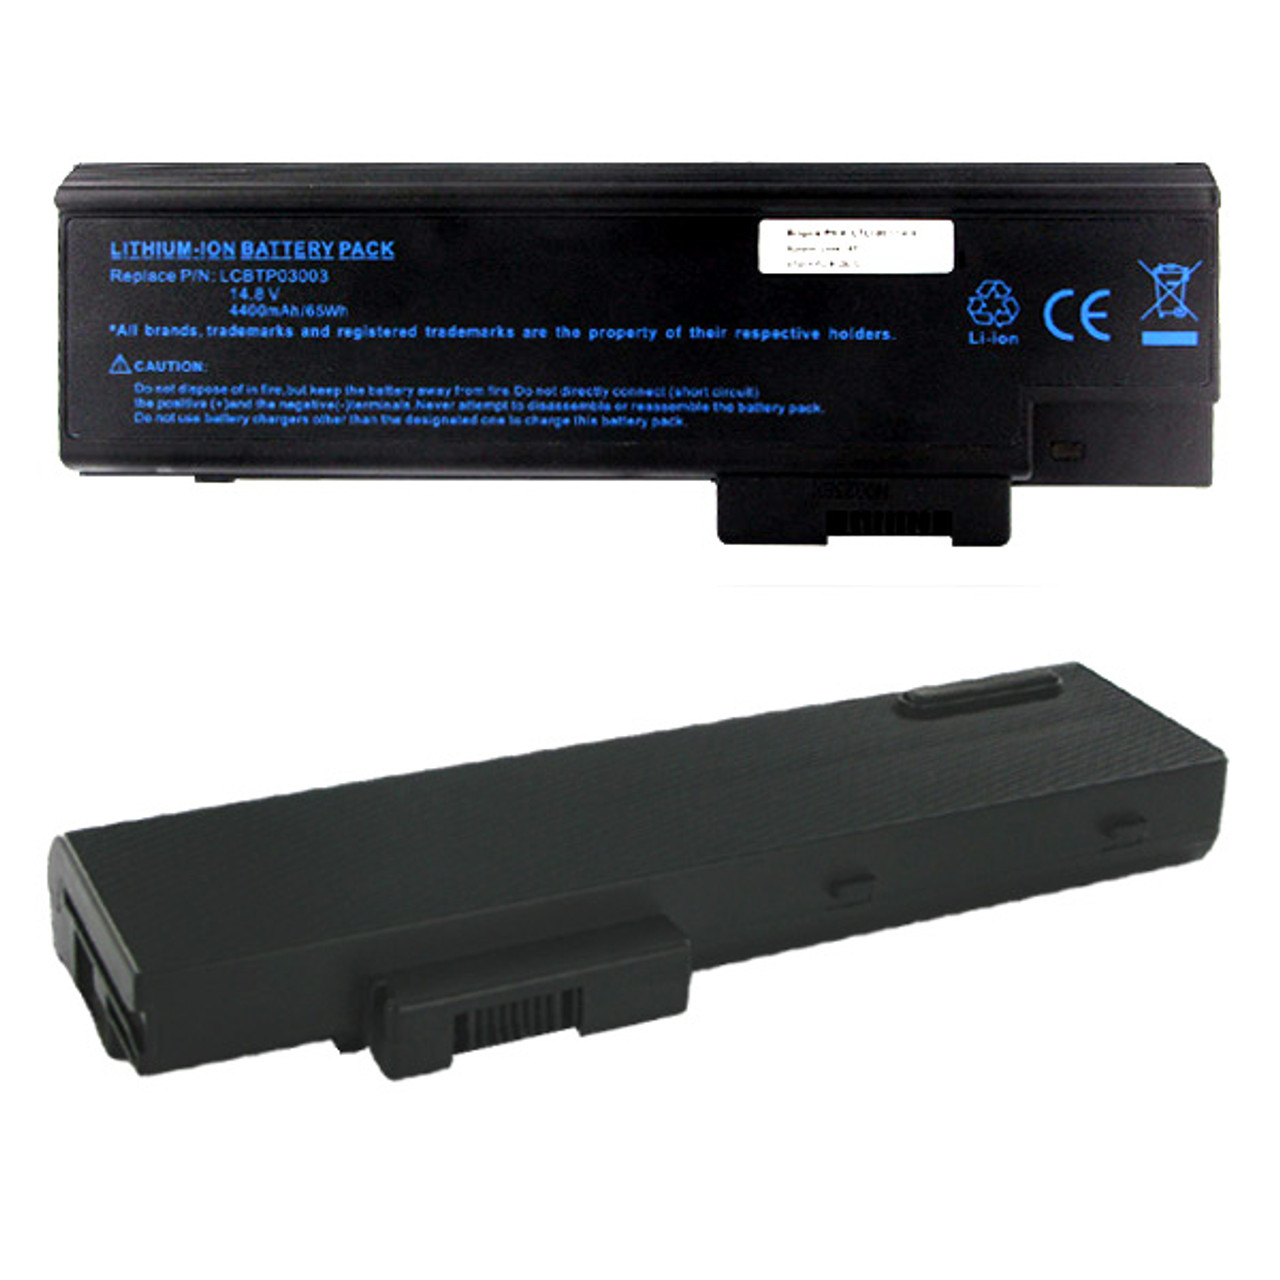 Acer 4UR18650F-1-QC192,BTP-AS1681, BT.T5003.001, BT.T5003.002,  BT.T5005.001, BT.T5005.002, BT.T5007.001, BT.T5007.002, LC.BTP03.003 Laptop Battery - 14.8V 4400mAh 65WH 8 Cell Notebook Replacement